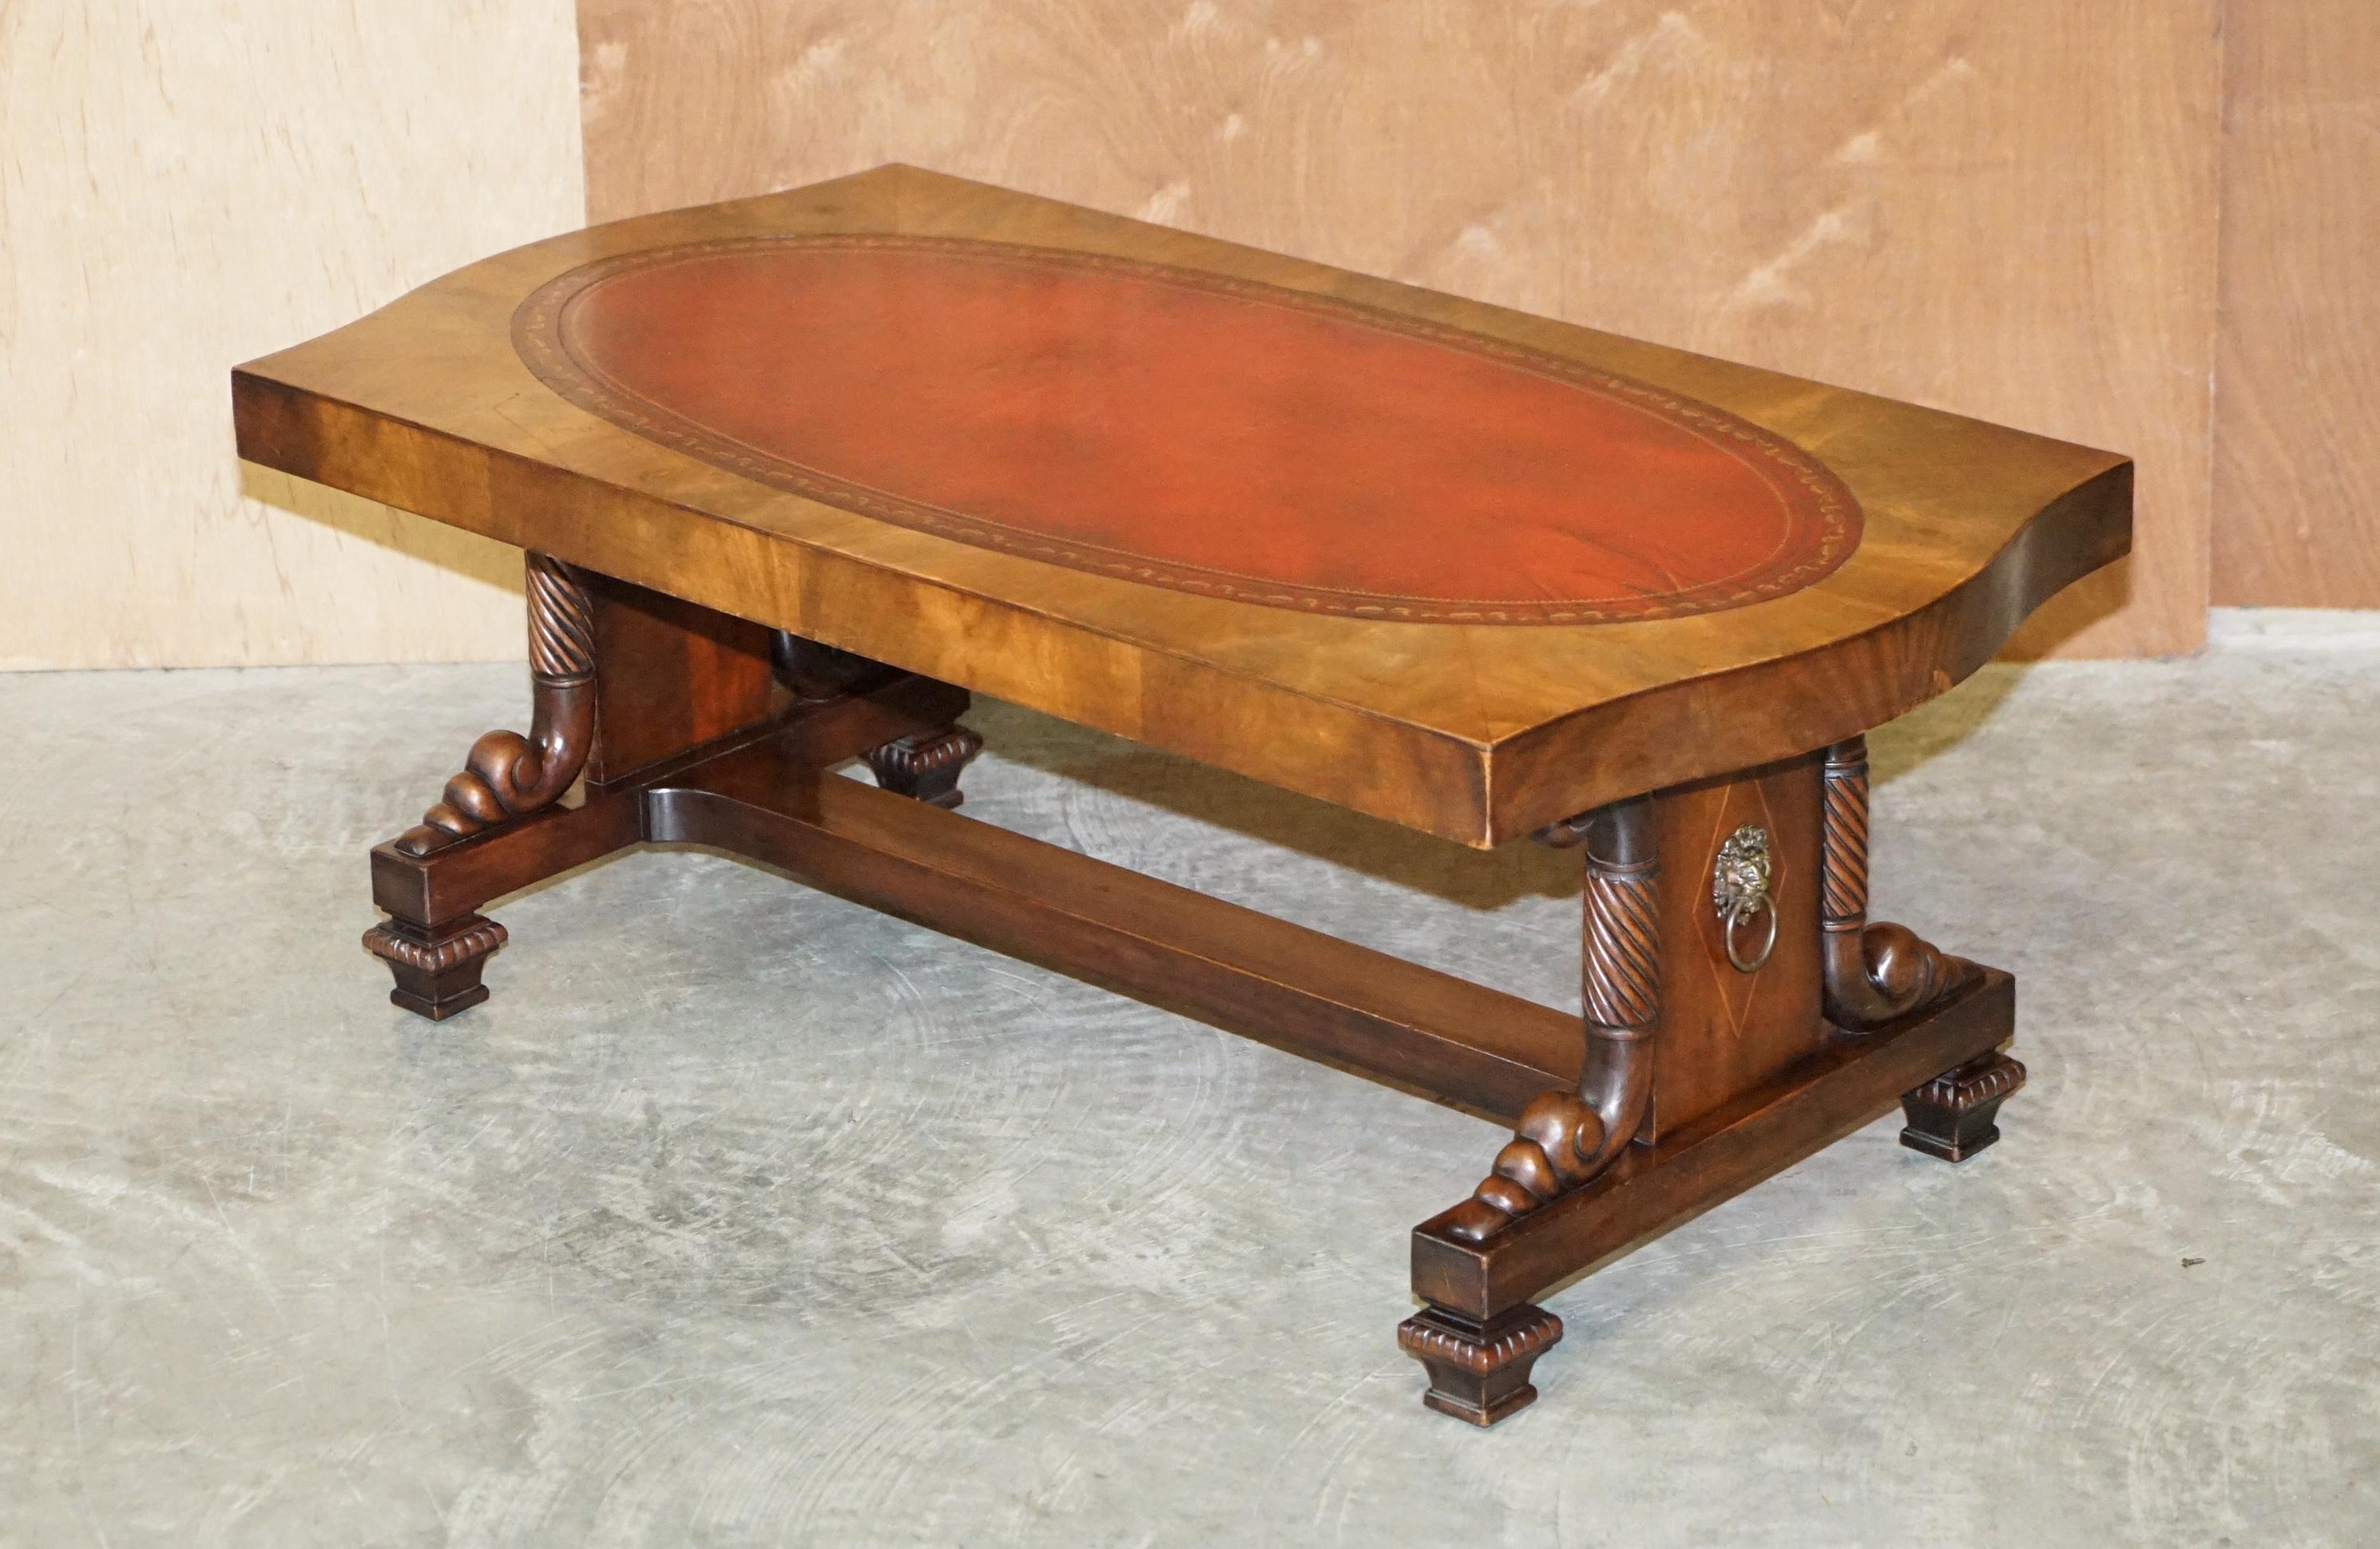 We are delighted to offer for sale this stunning, Regency style coffee table in Walnut with an oxblood oval leather top and Lions Head brass handles

A very good looking well made and decorative coffee or cocktail table. This is based on a Regency